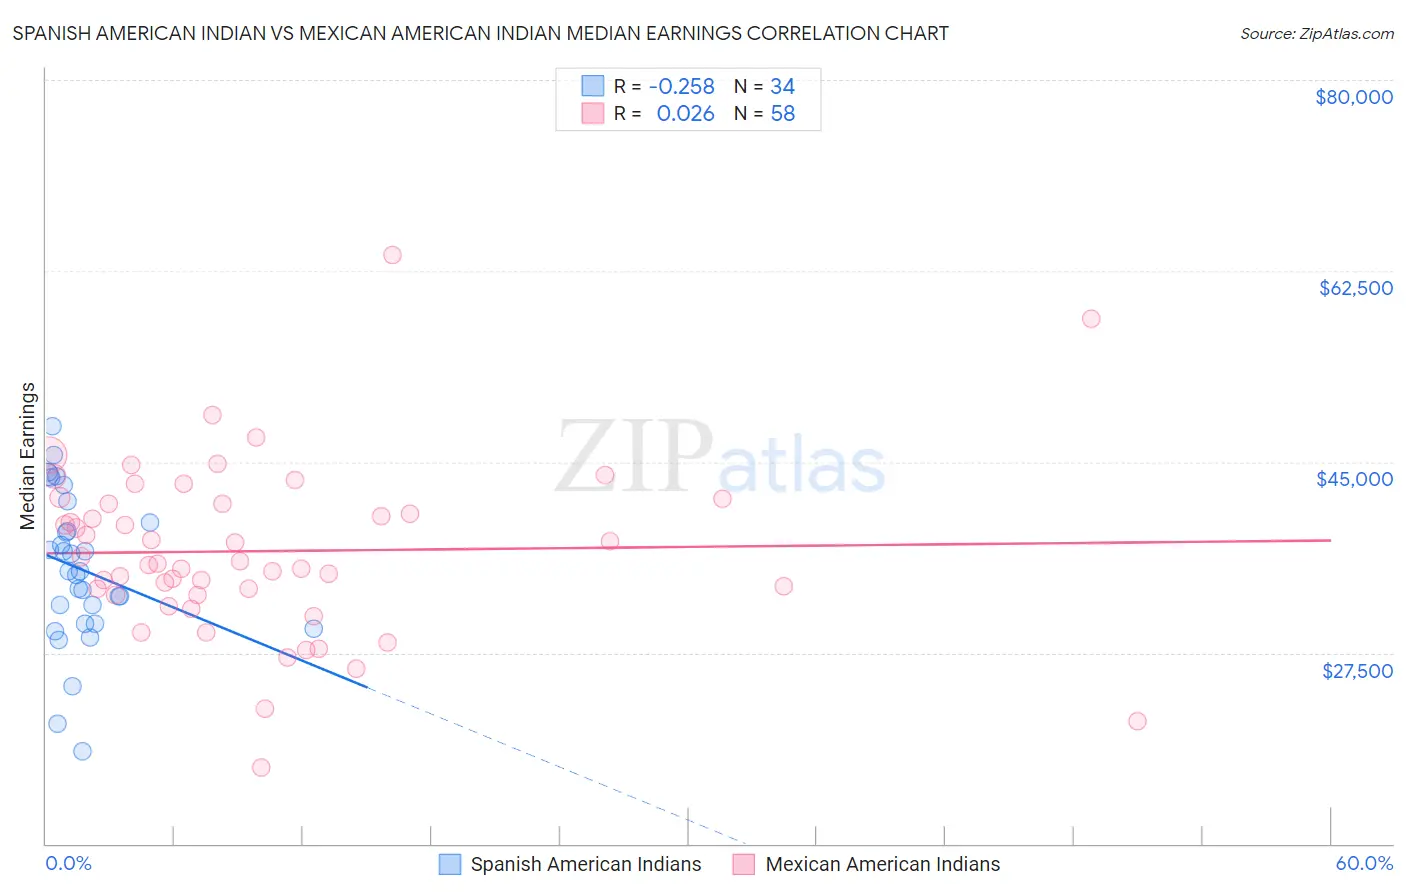 Spanish American Indian vs Mexican American Indian Median Earnings